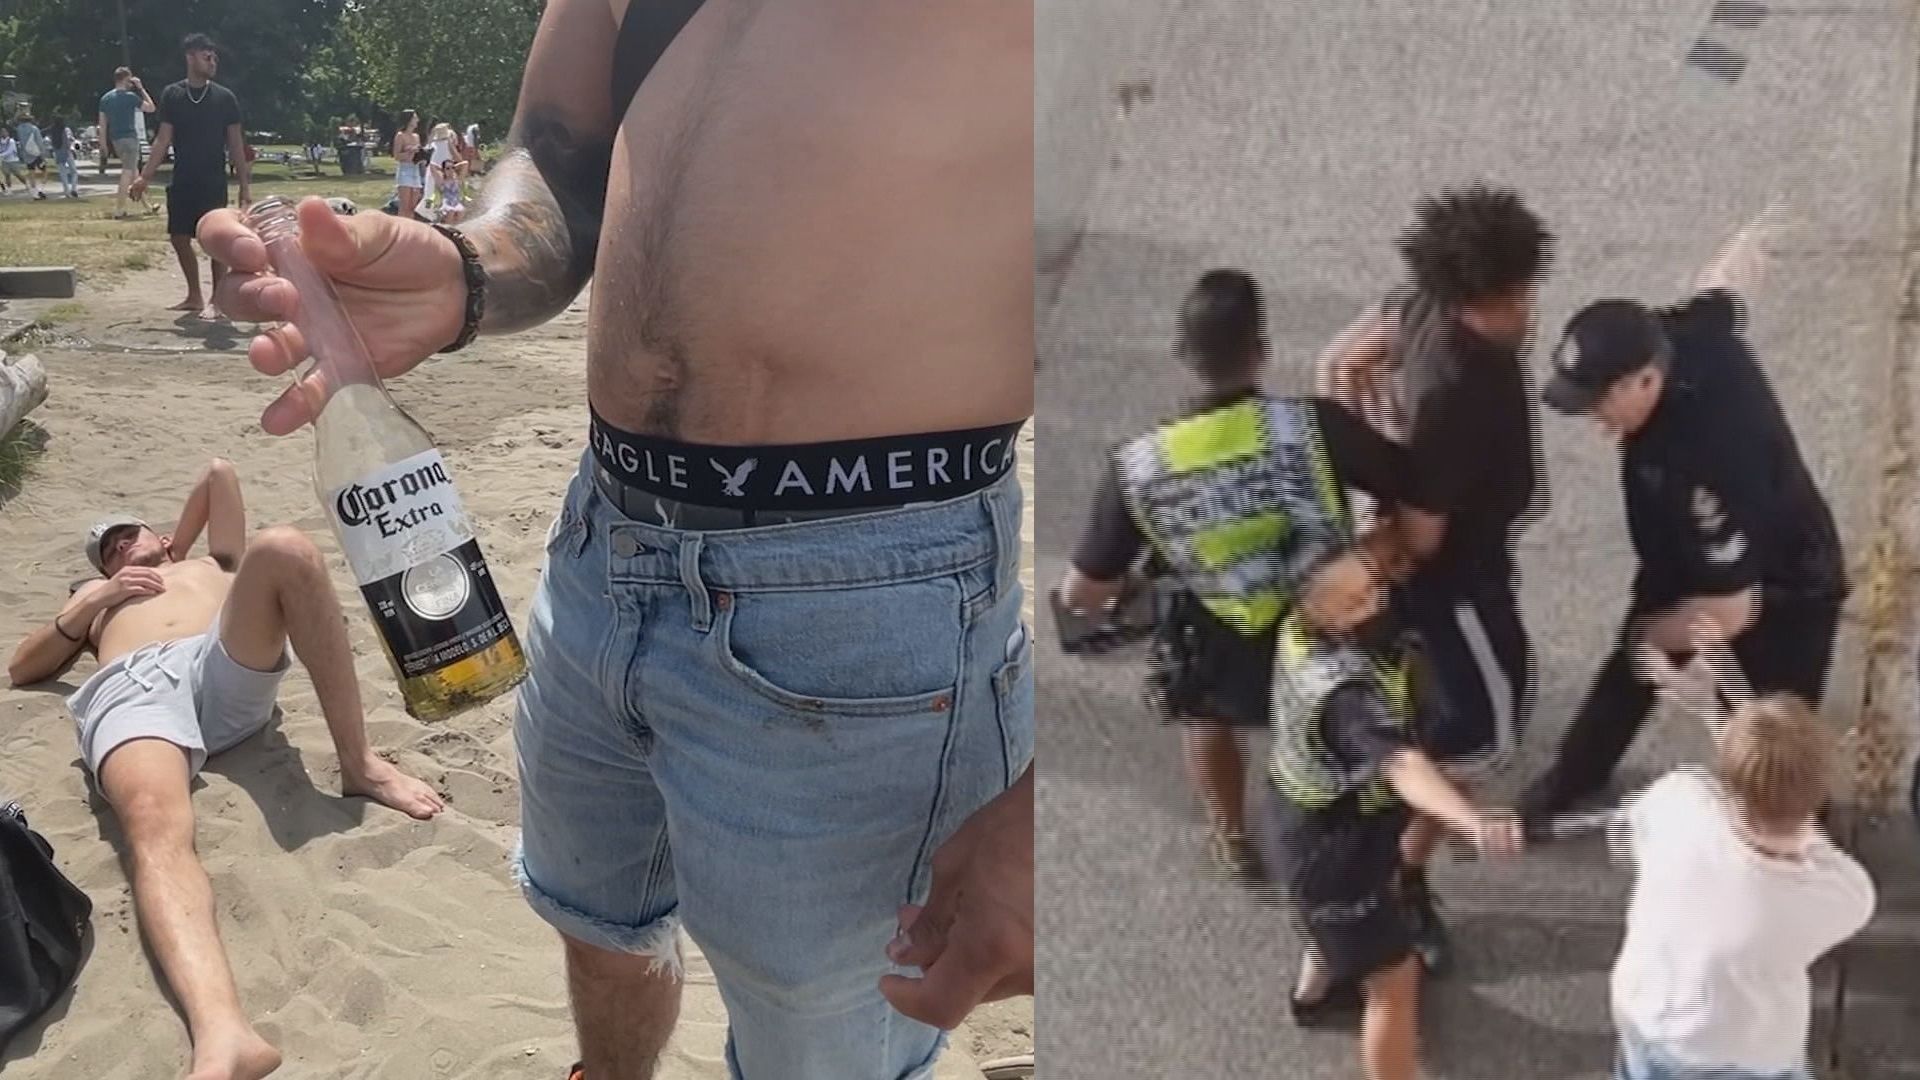 Request for more funding to police booze on the beach